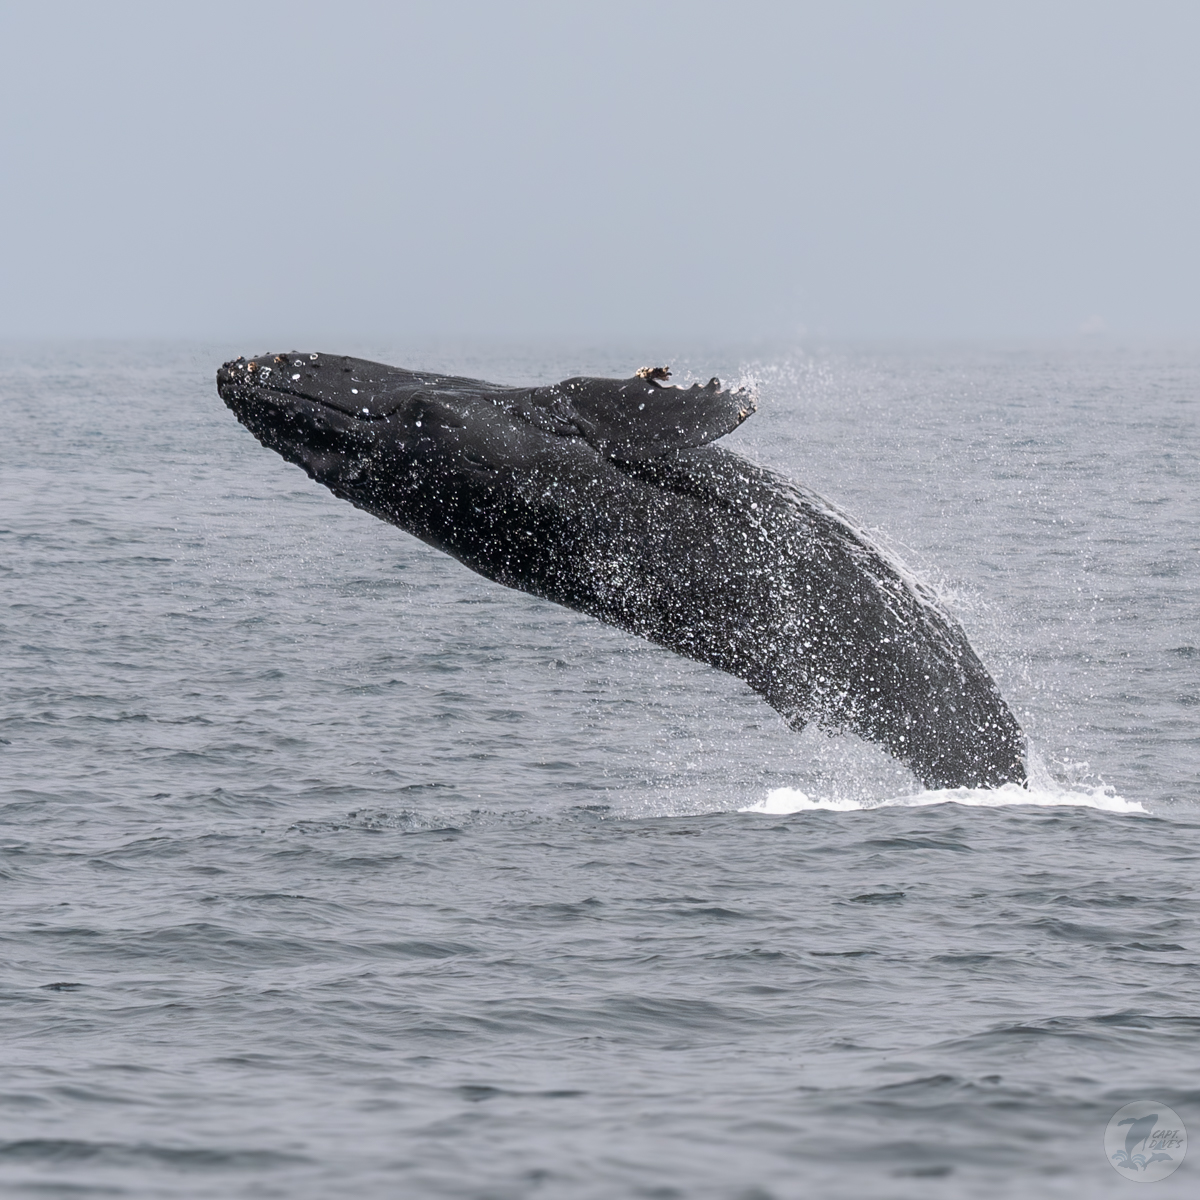 #Lungefeeds and #tailthrows and #breaching, oh my! It might not be as catchy a phrase as lions, tigers and bears, (and thank goodness we’re not finding any of those in the #ocean), but we are having fun viewing these amazing #whalebehaviors. #captdaves (📸: Matt Stumpf 4.21.24)